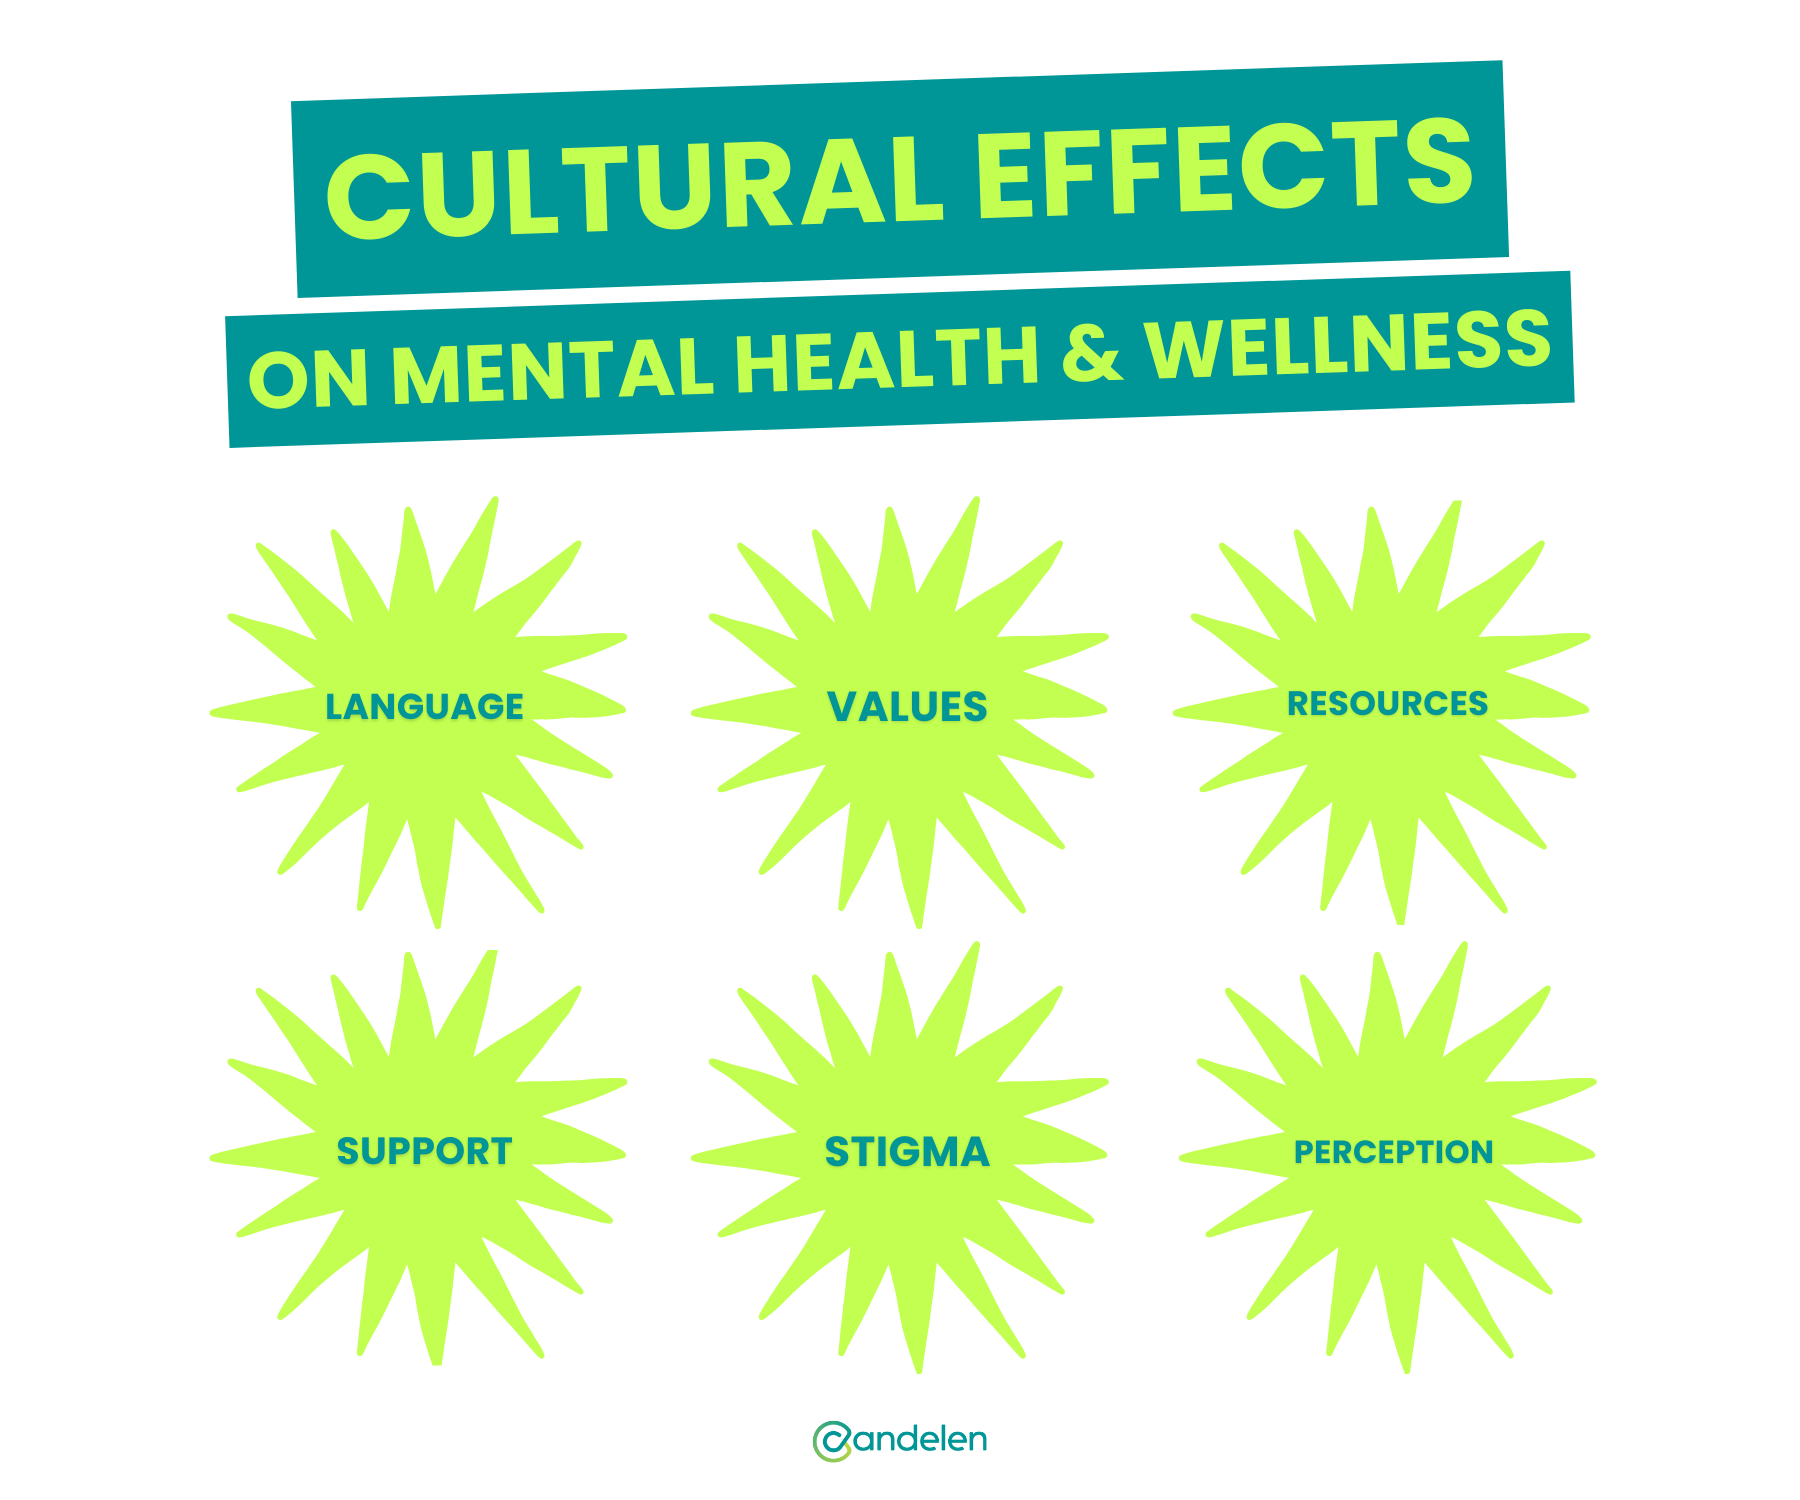 Are there cultural influences on emotional well-being?